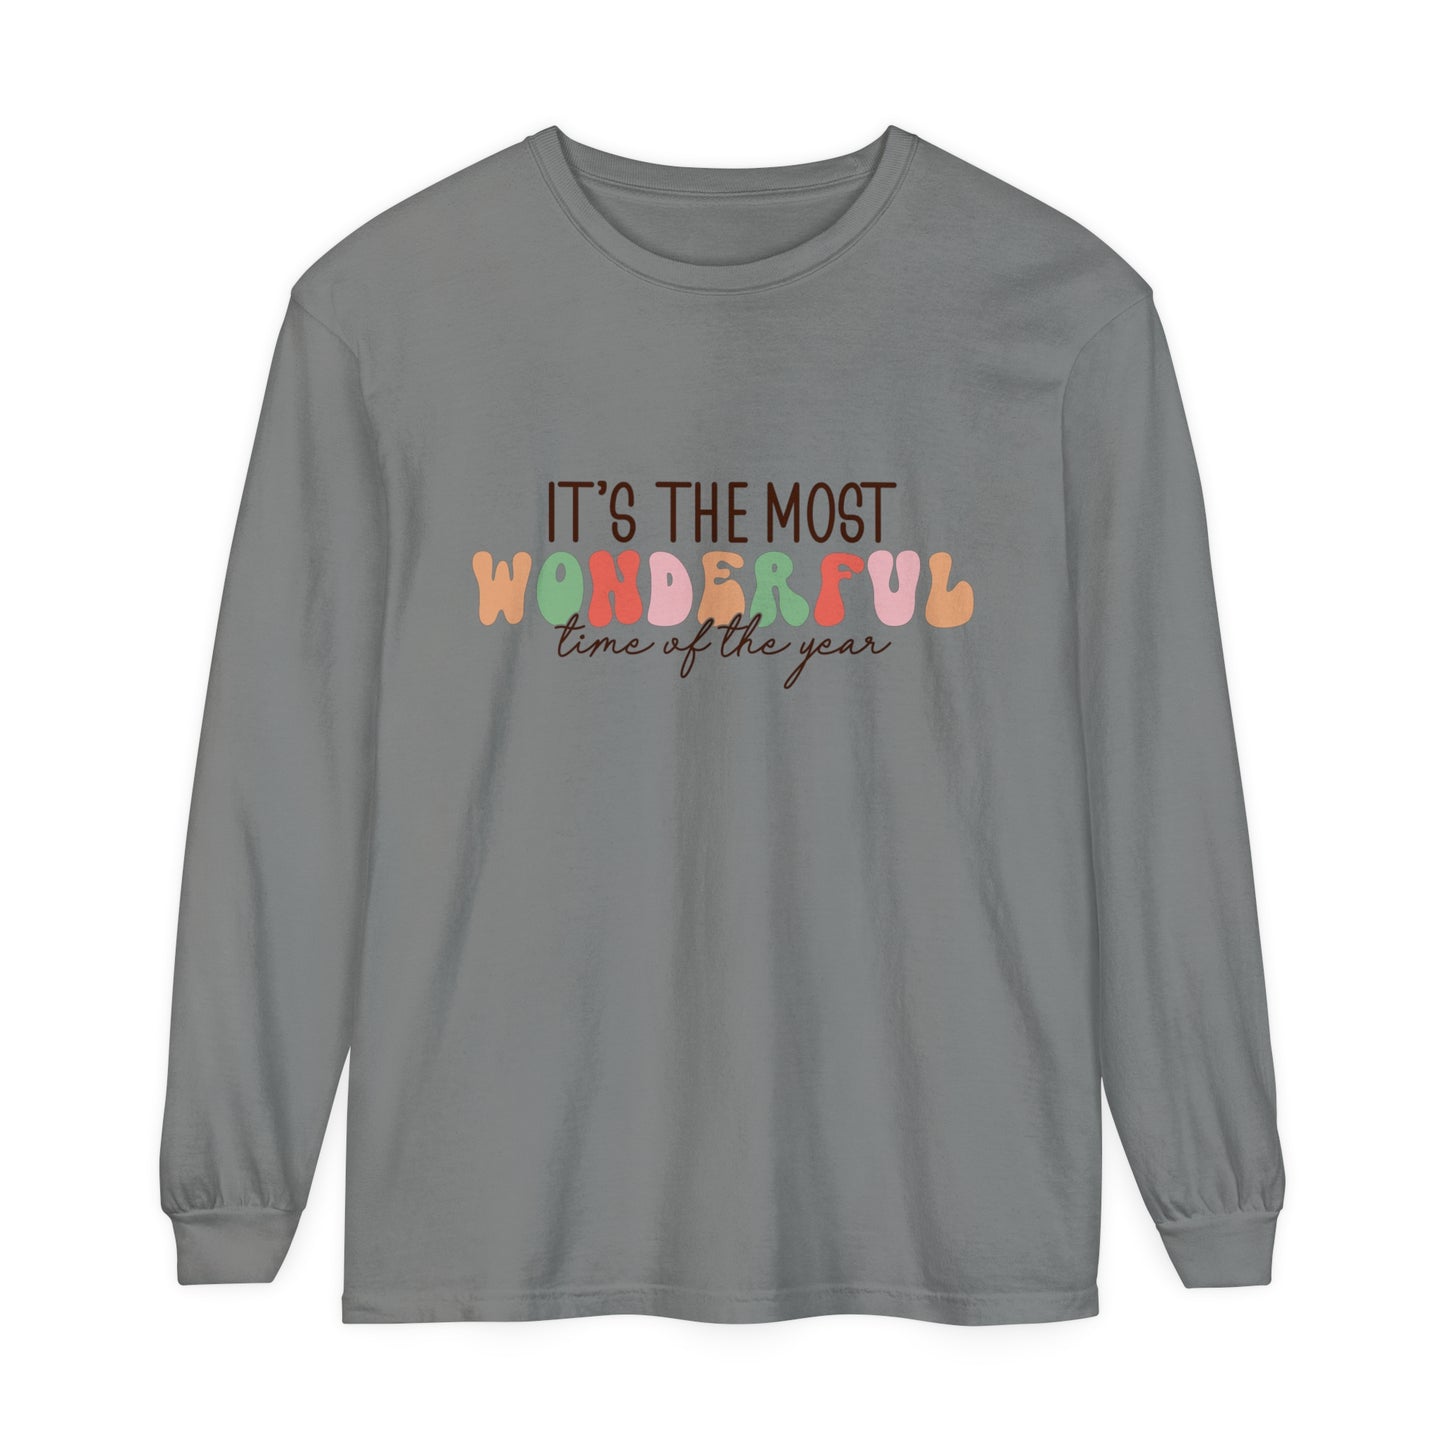 It's the most wonderful time of the year Women's Loose Long Sleeve T-Shirt